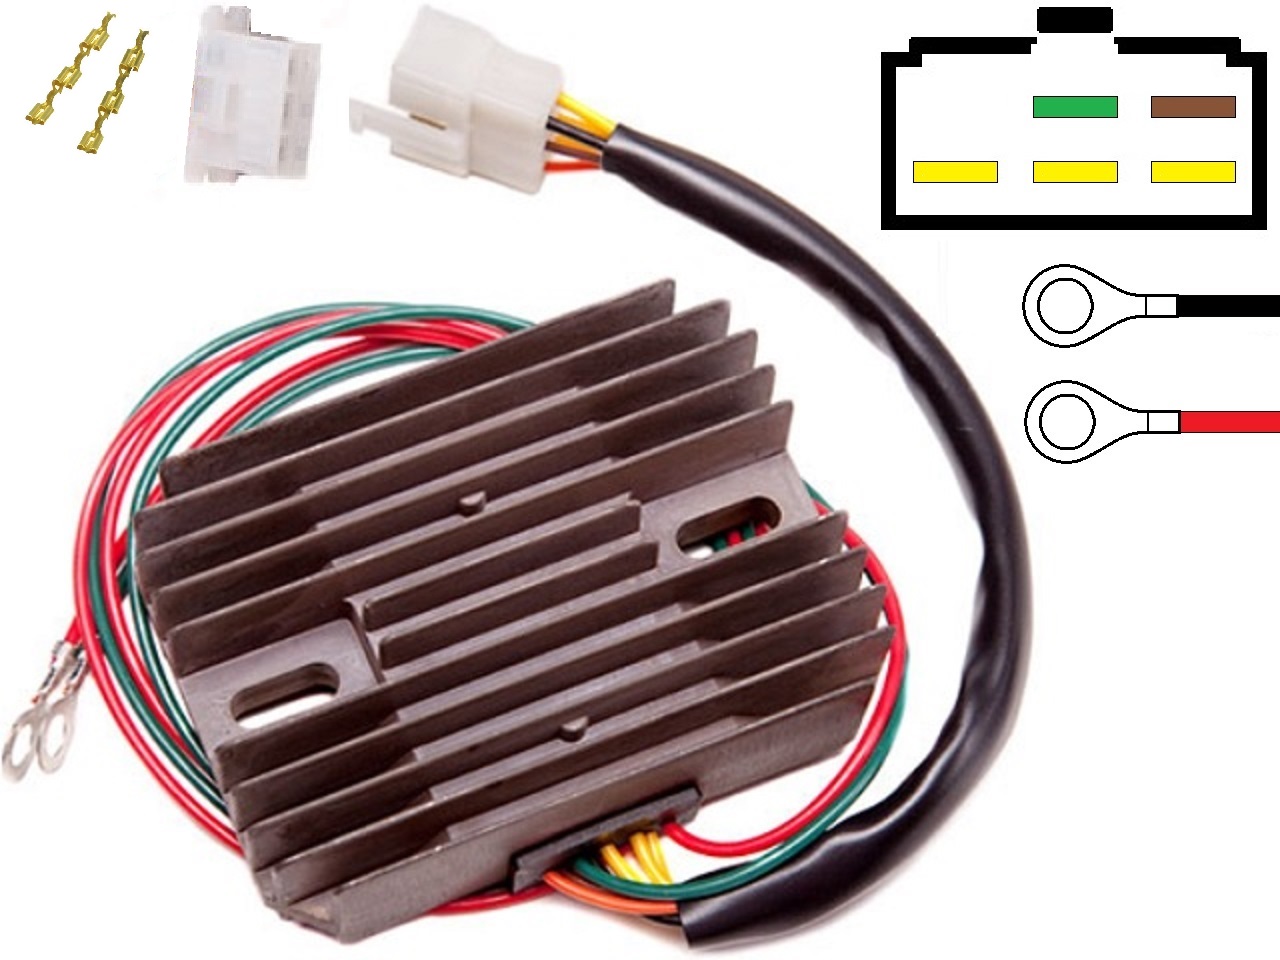 CARR451 - BMW Moto Guzzi MOSFET Voltage regulator rectifier - Rotor-1 - Click Image to Close